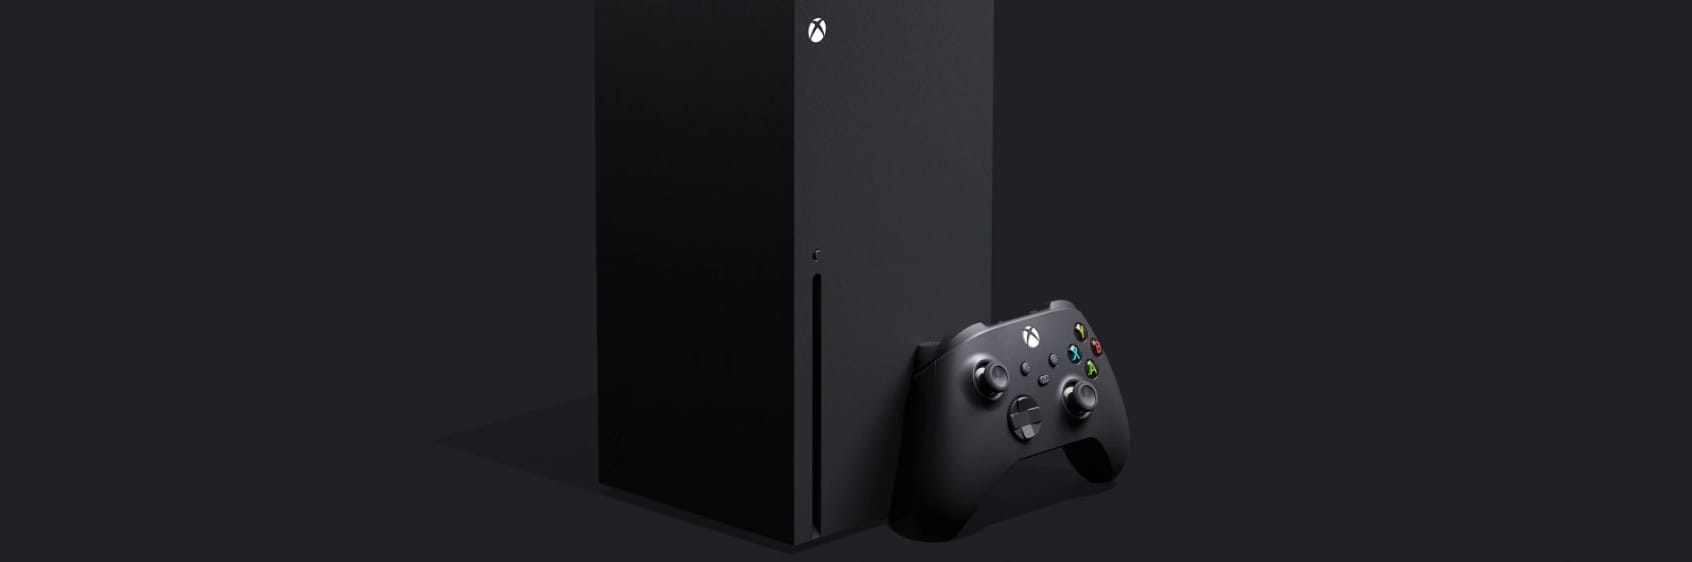 Xbox Series X Supports DirectX 12_2